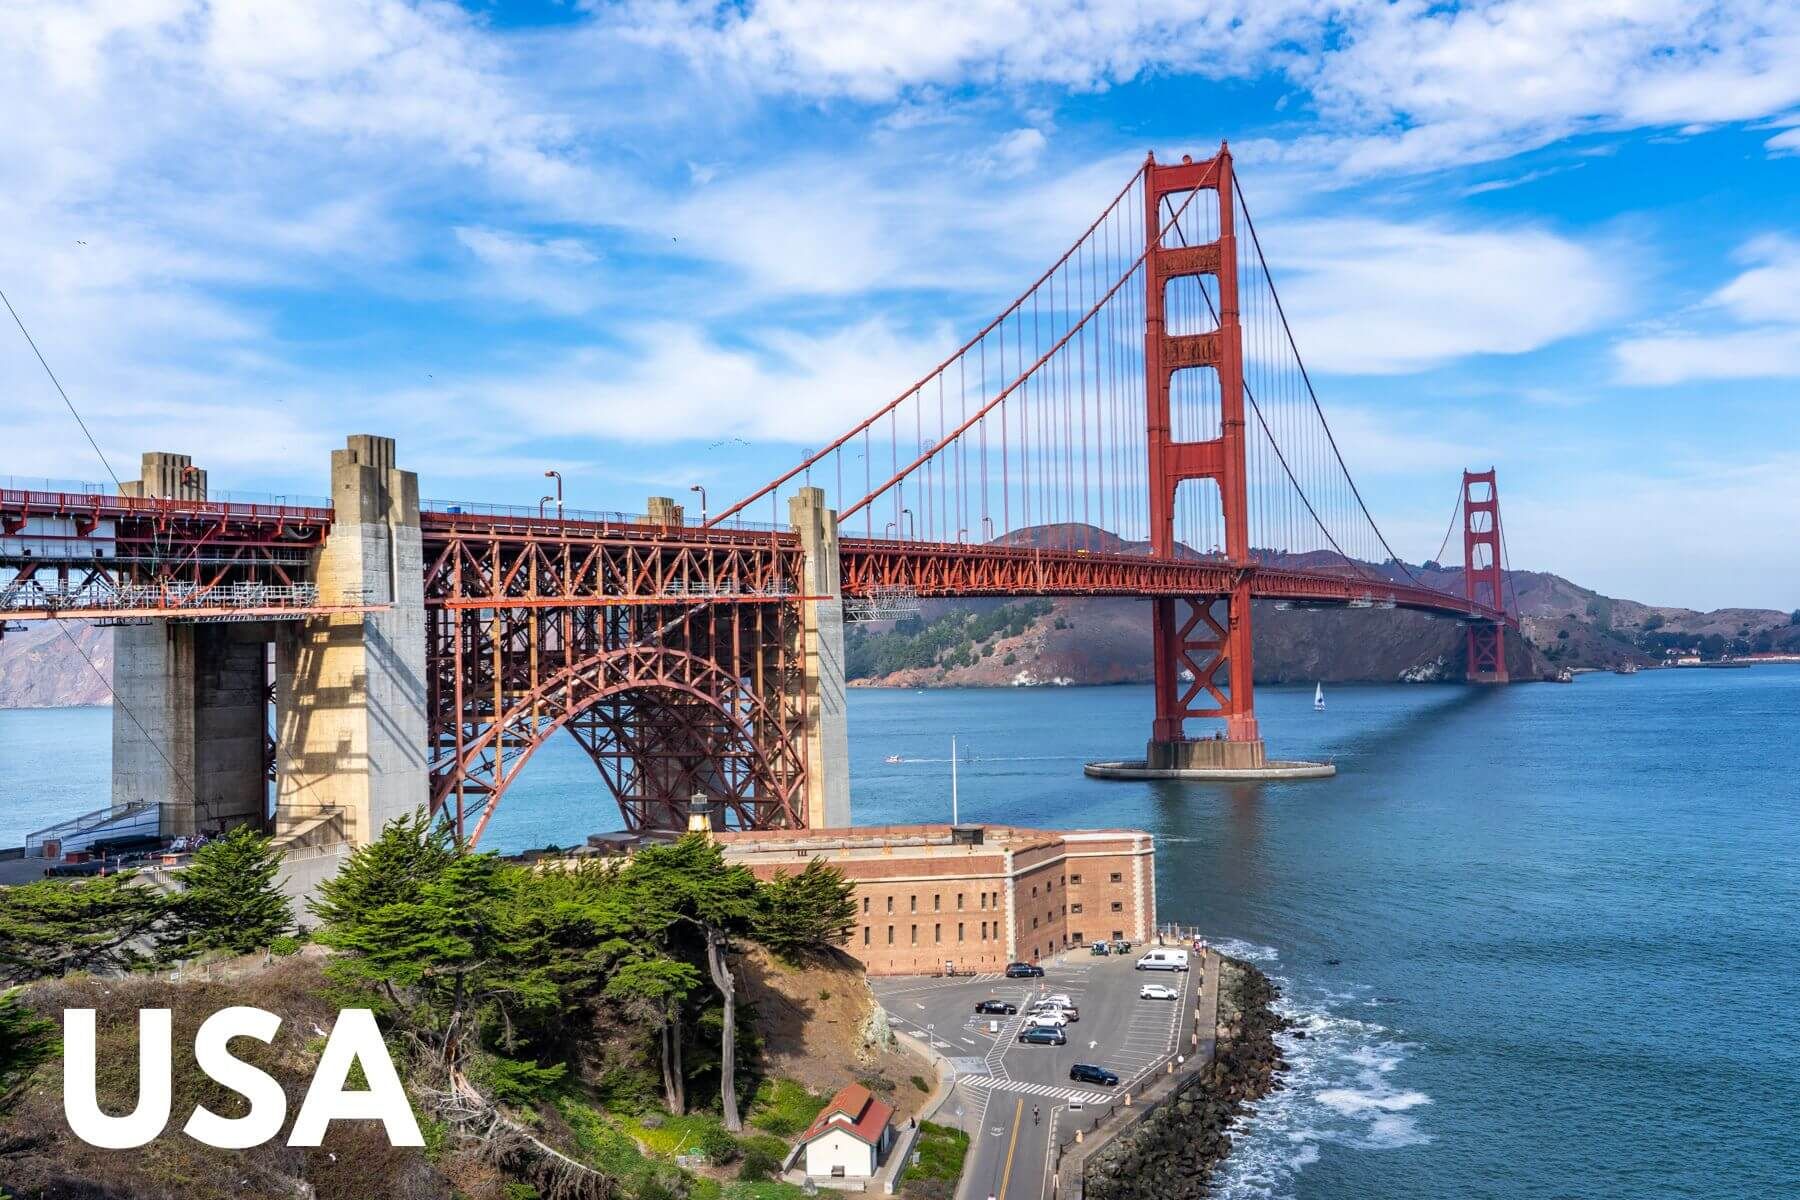 Photo of the Golden Gate Bridge in San Francisco during the day on a slight side profile with the word USA overlaid